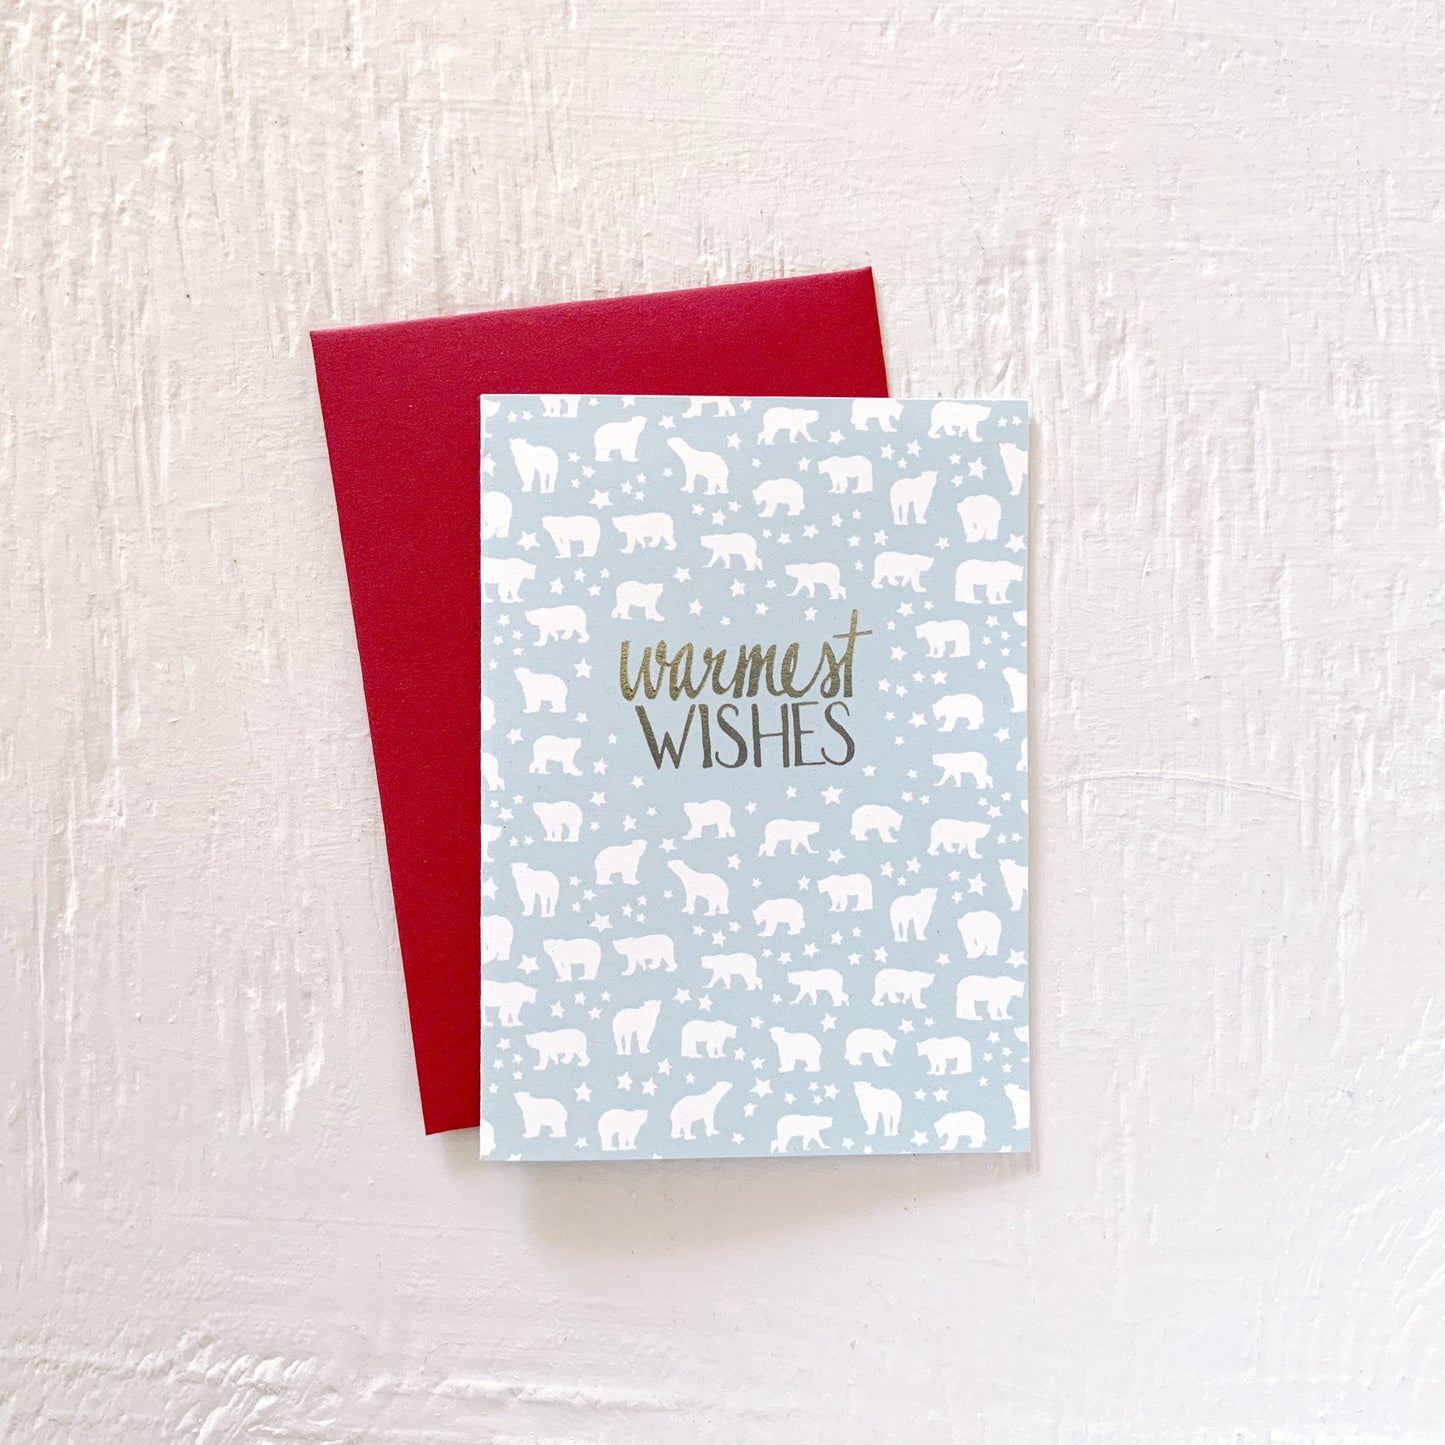 WARMEST WISHES holiday folded cards